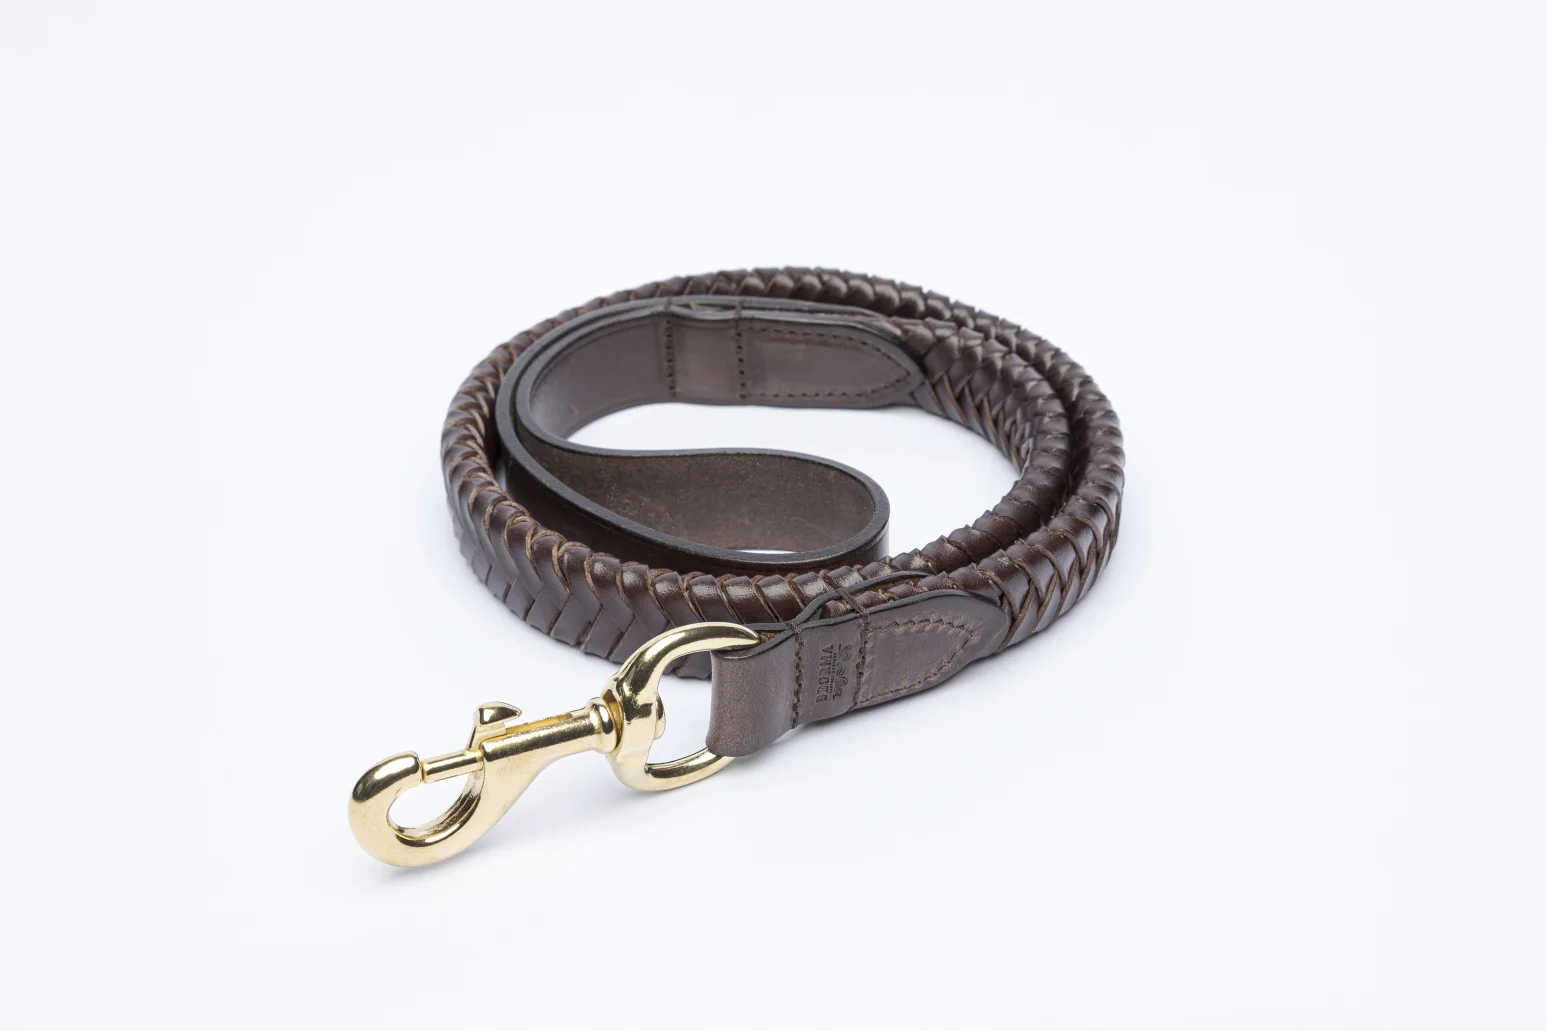 Plaited Dog Lead in Vegetable Tan Leather in Dark Brown coiled